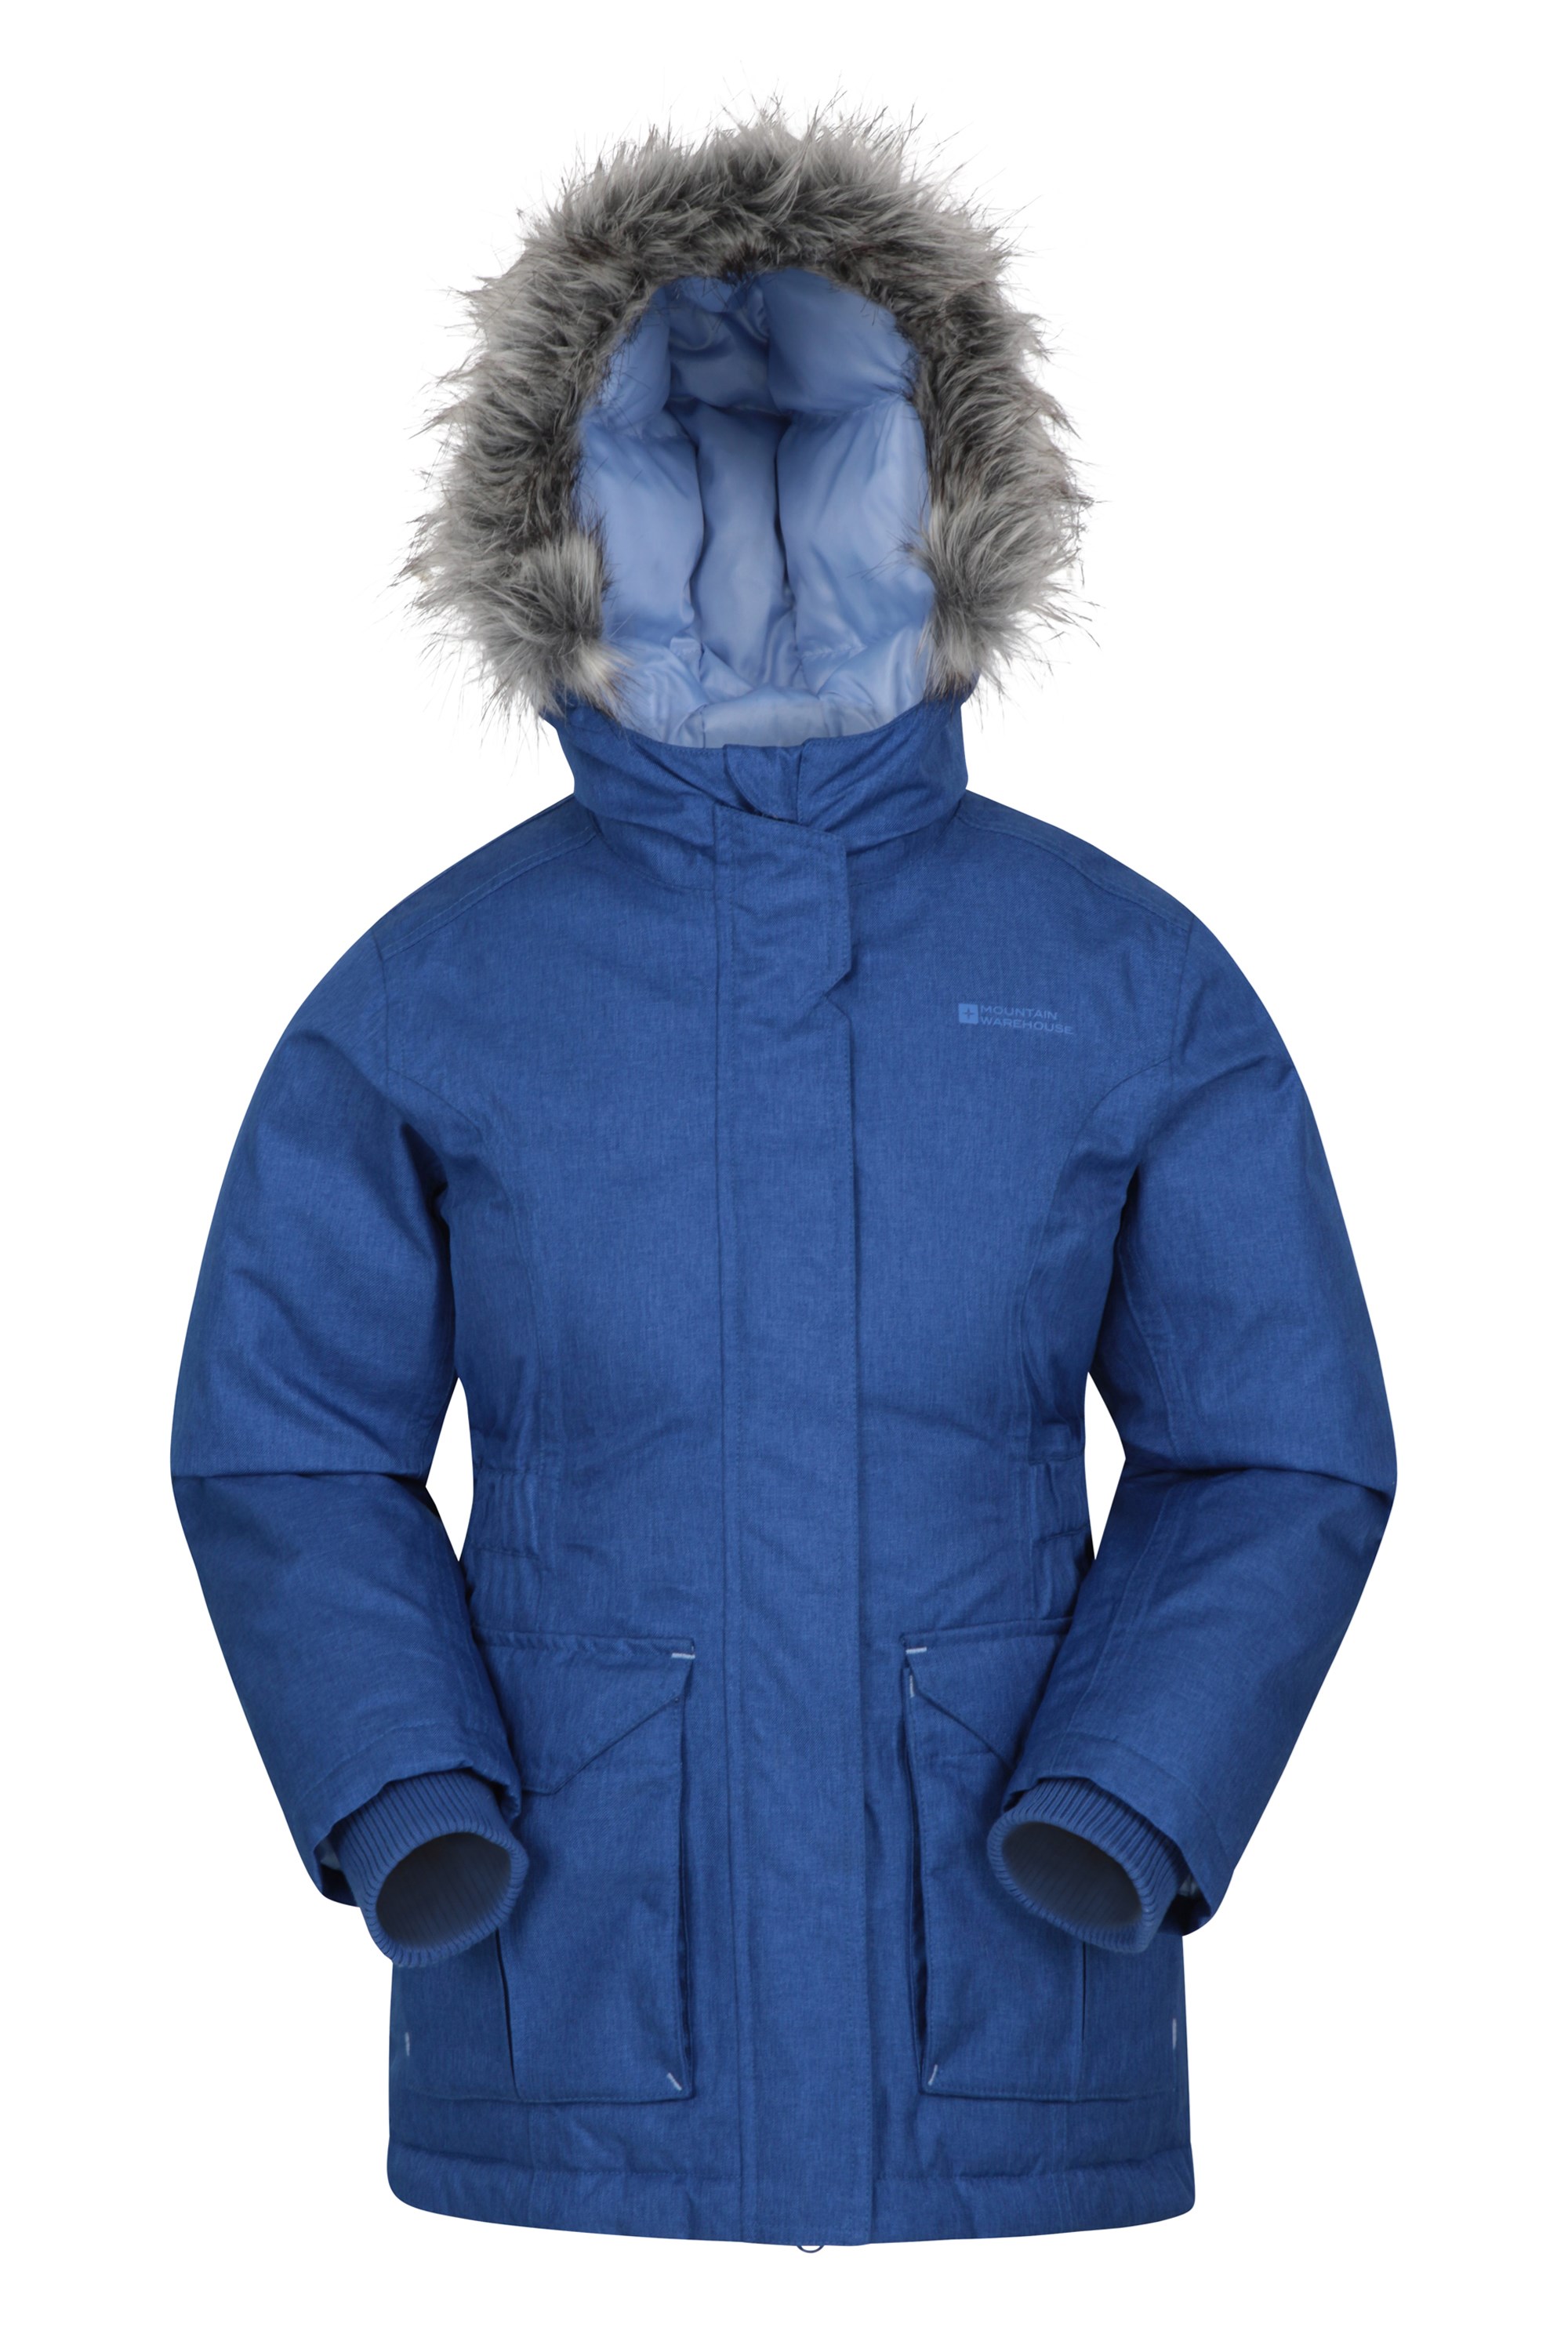 Mountain Warehouse Freeze Over Kids Down Padded Jacket Blue